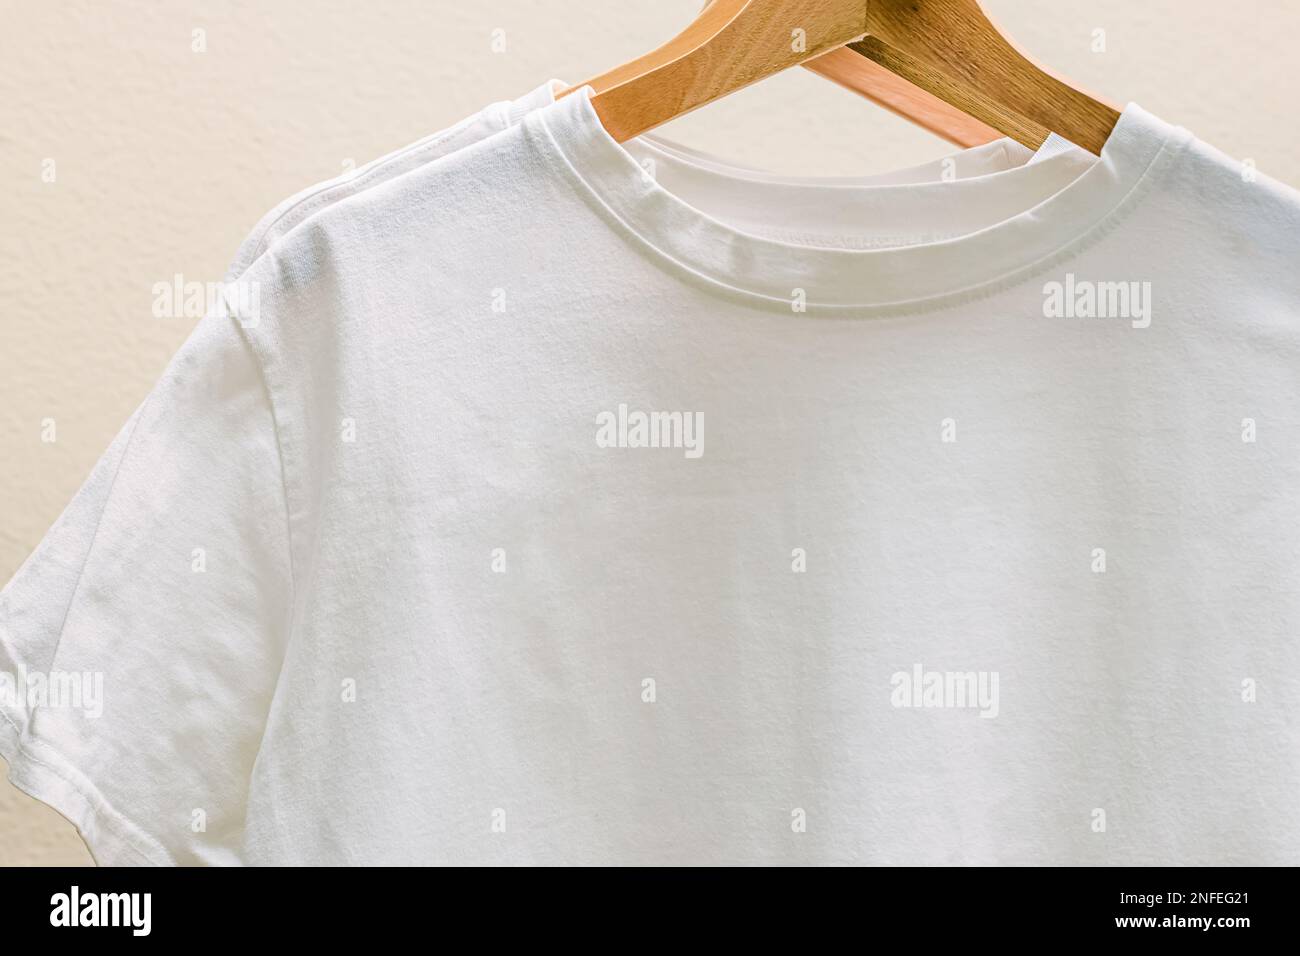 White cotton t-shirts on the hangers close-up. Place for text Stock Photo